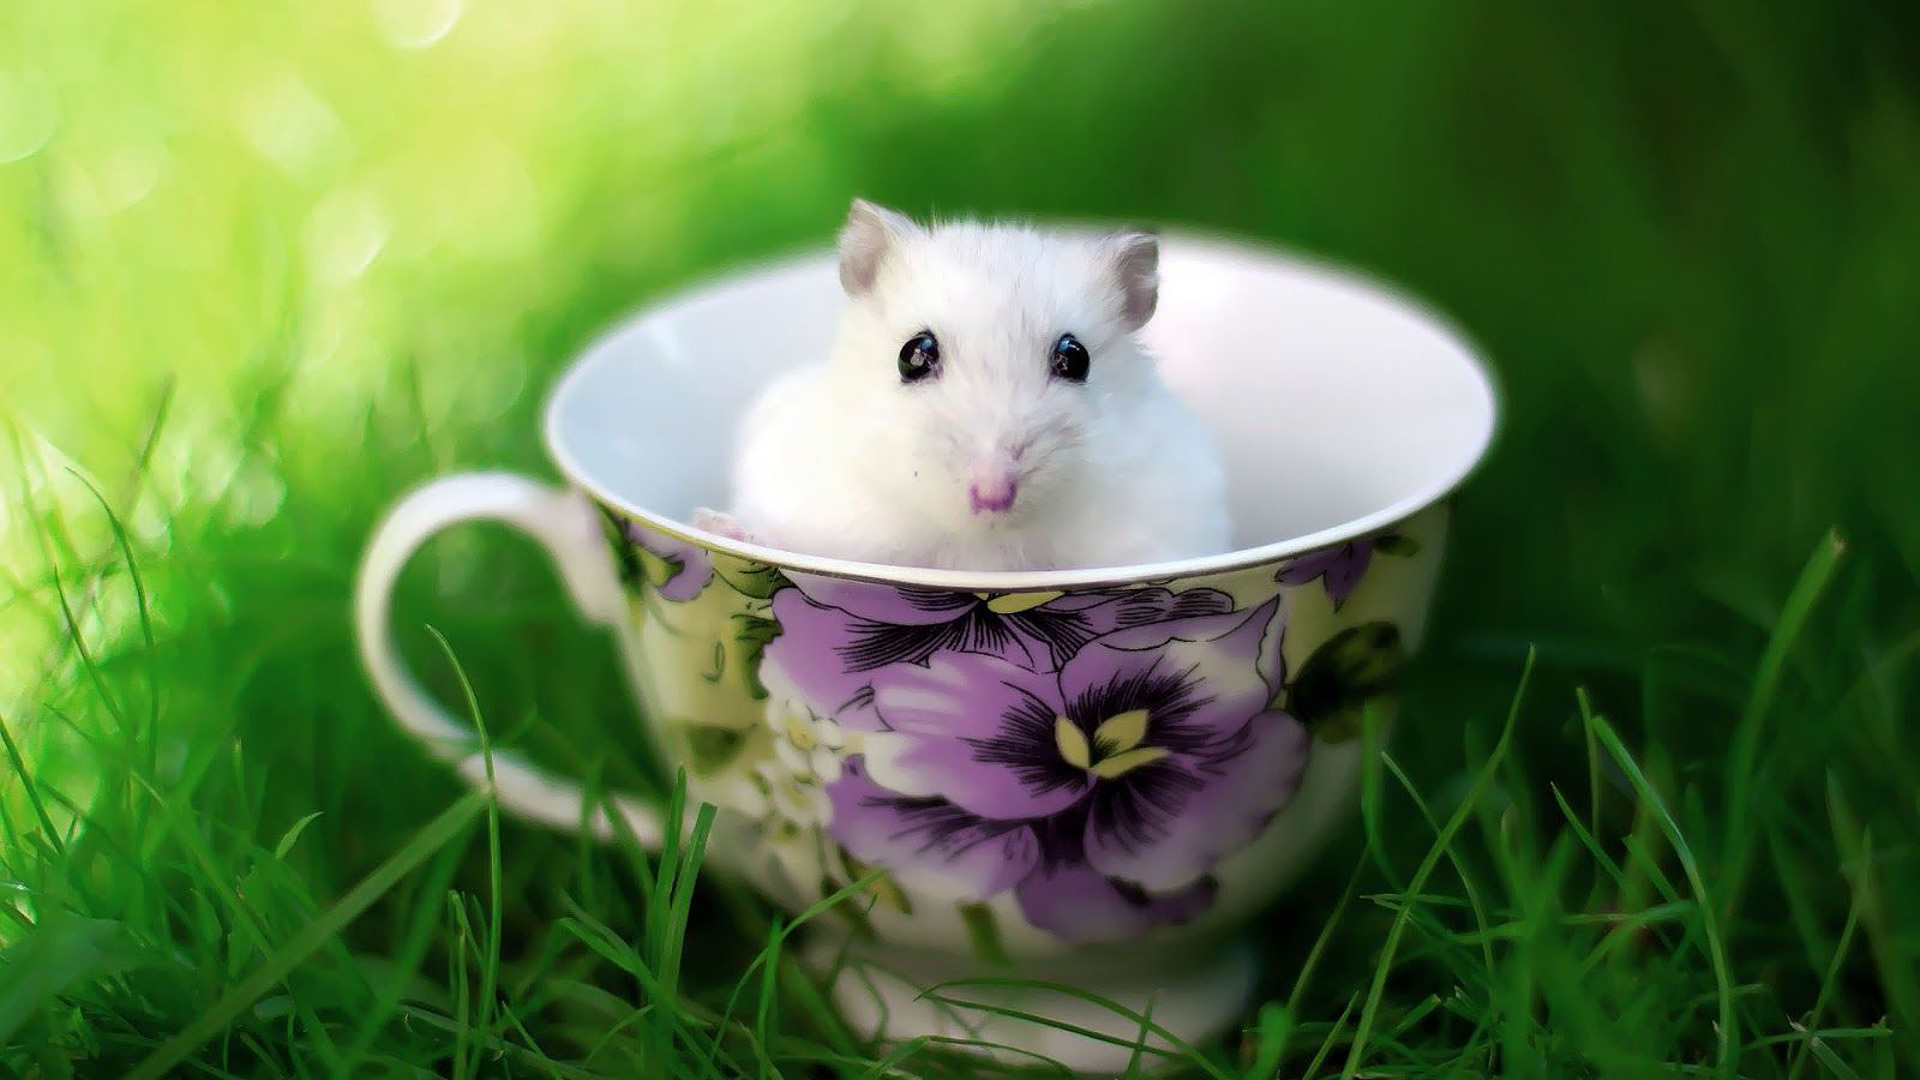 Funny Rat White Inside Cup On Green Grass Green Blur Wallpaper HD Funny Rat